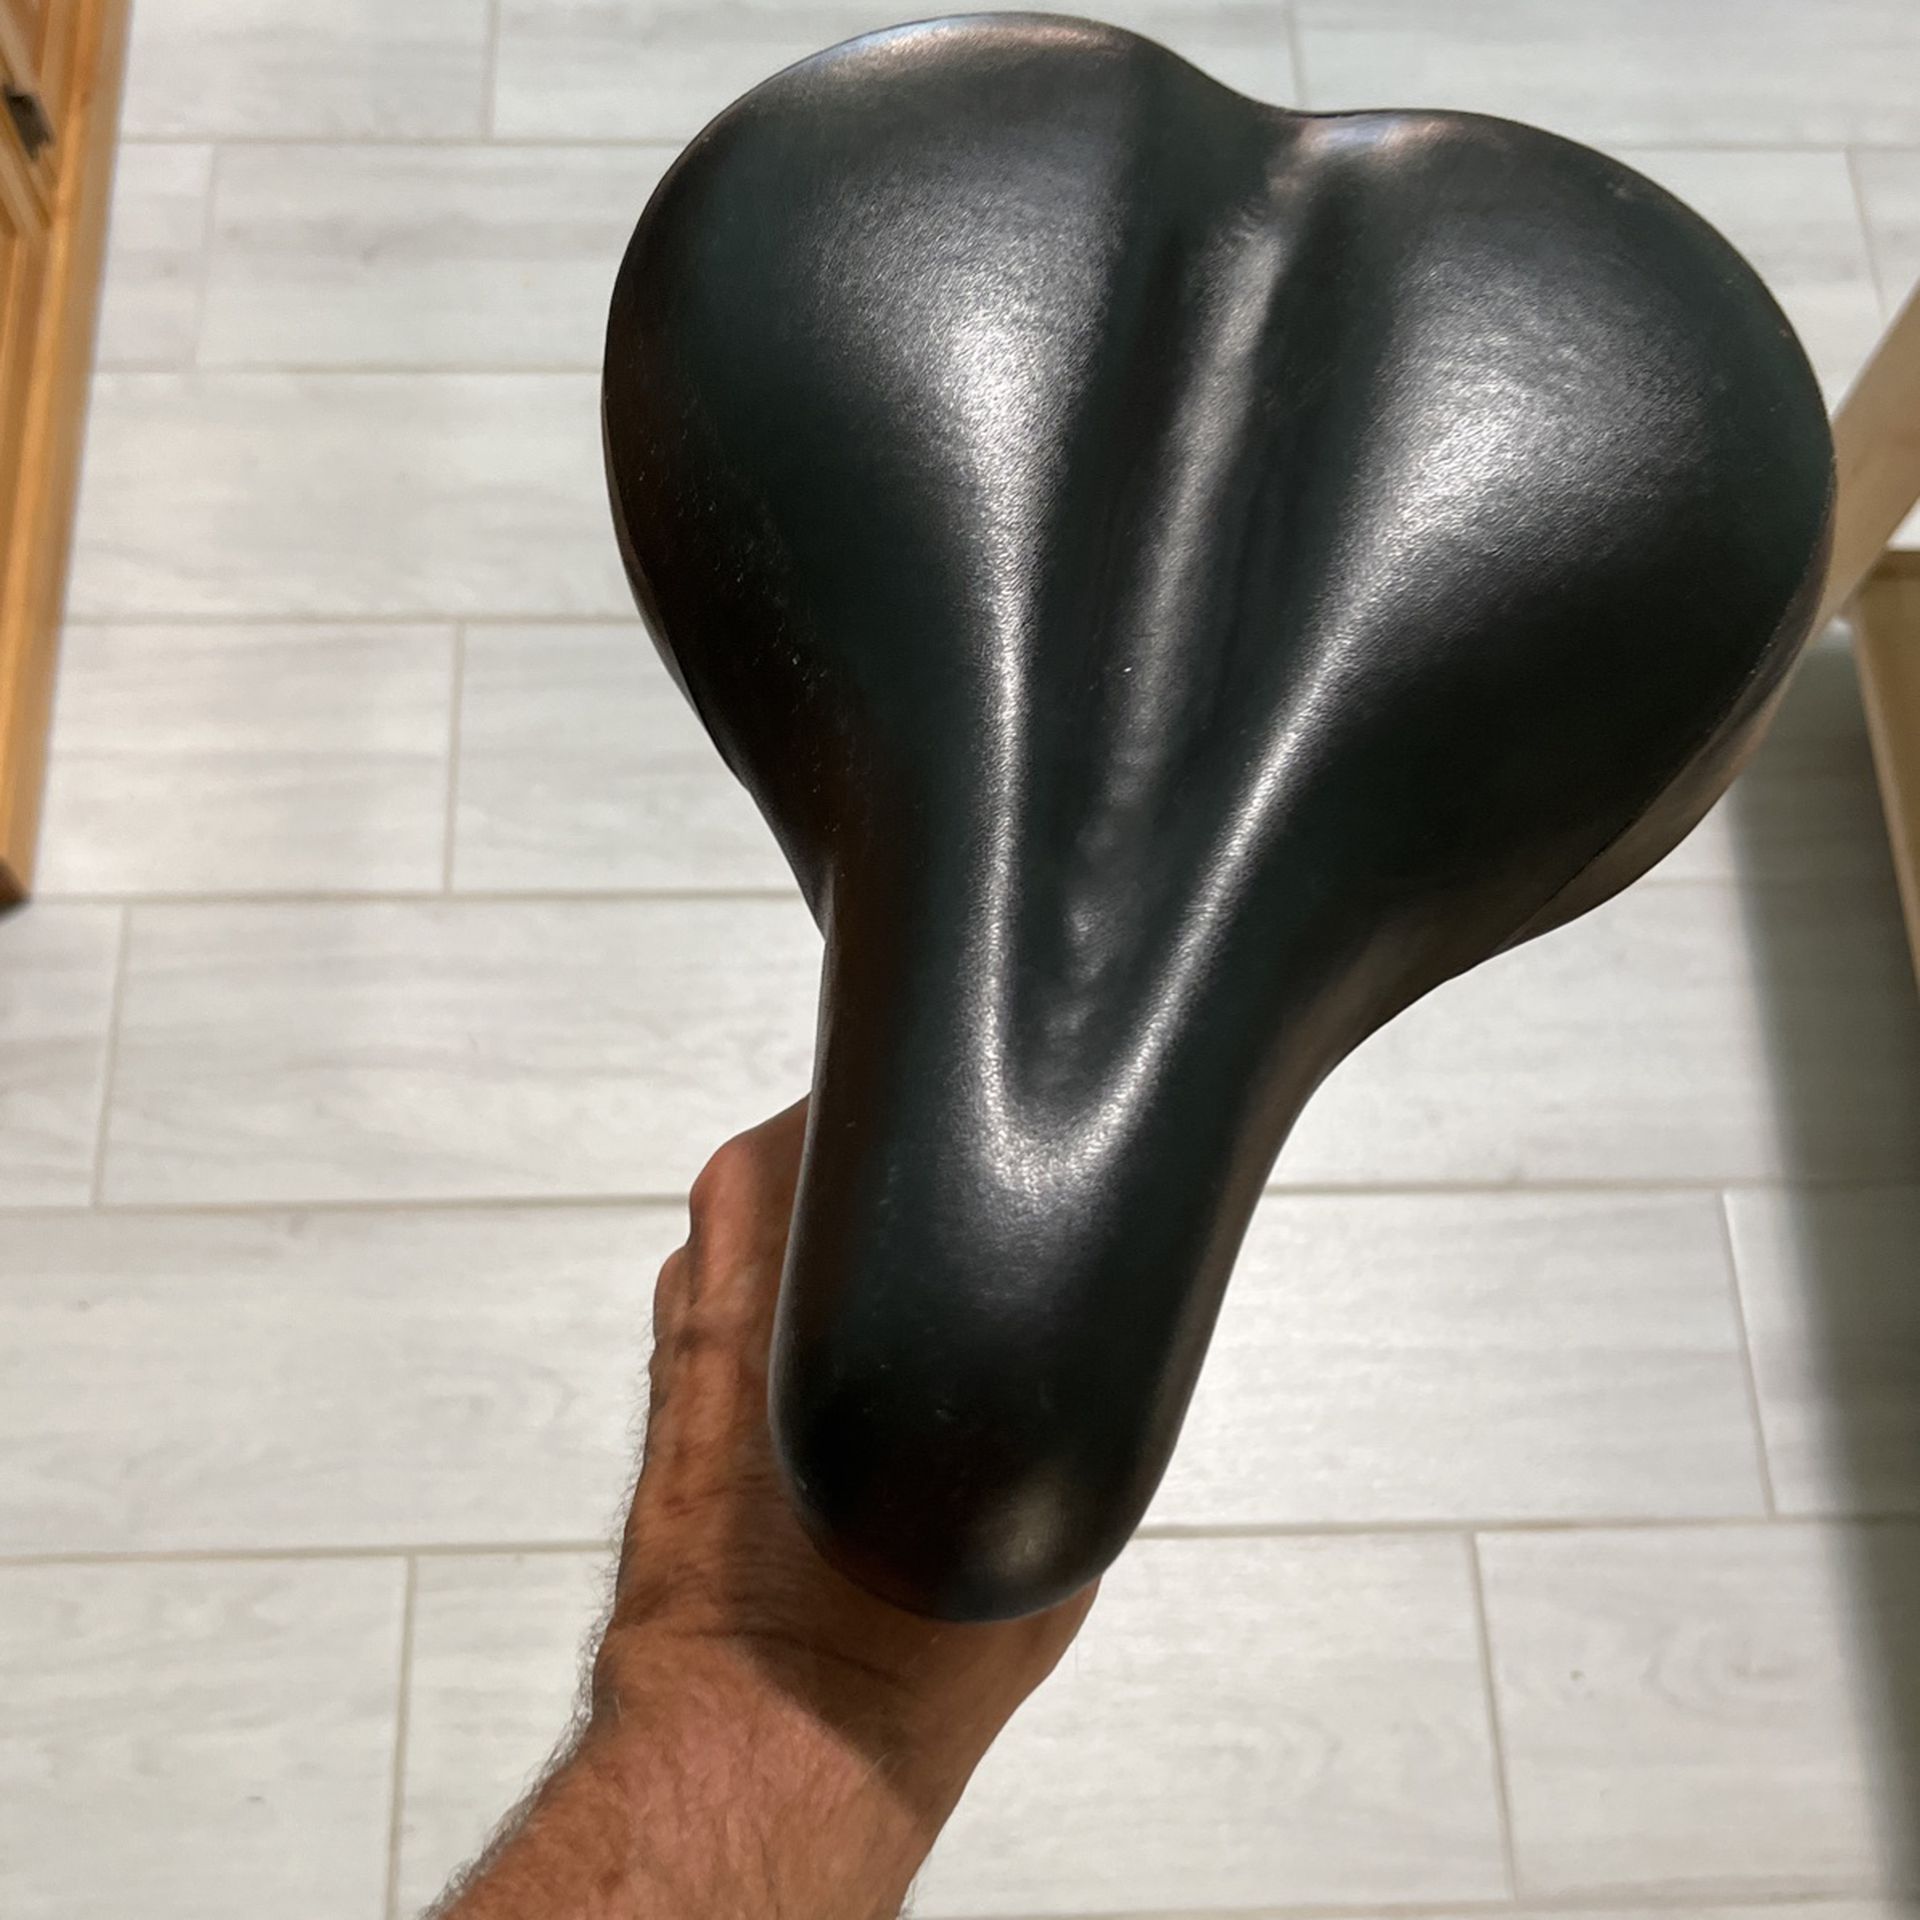 Bicycle seat for sale 12.00 Good Condition 